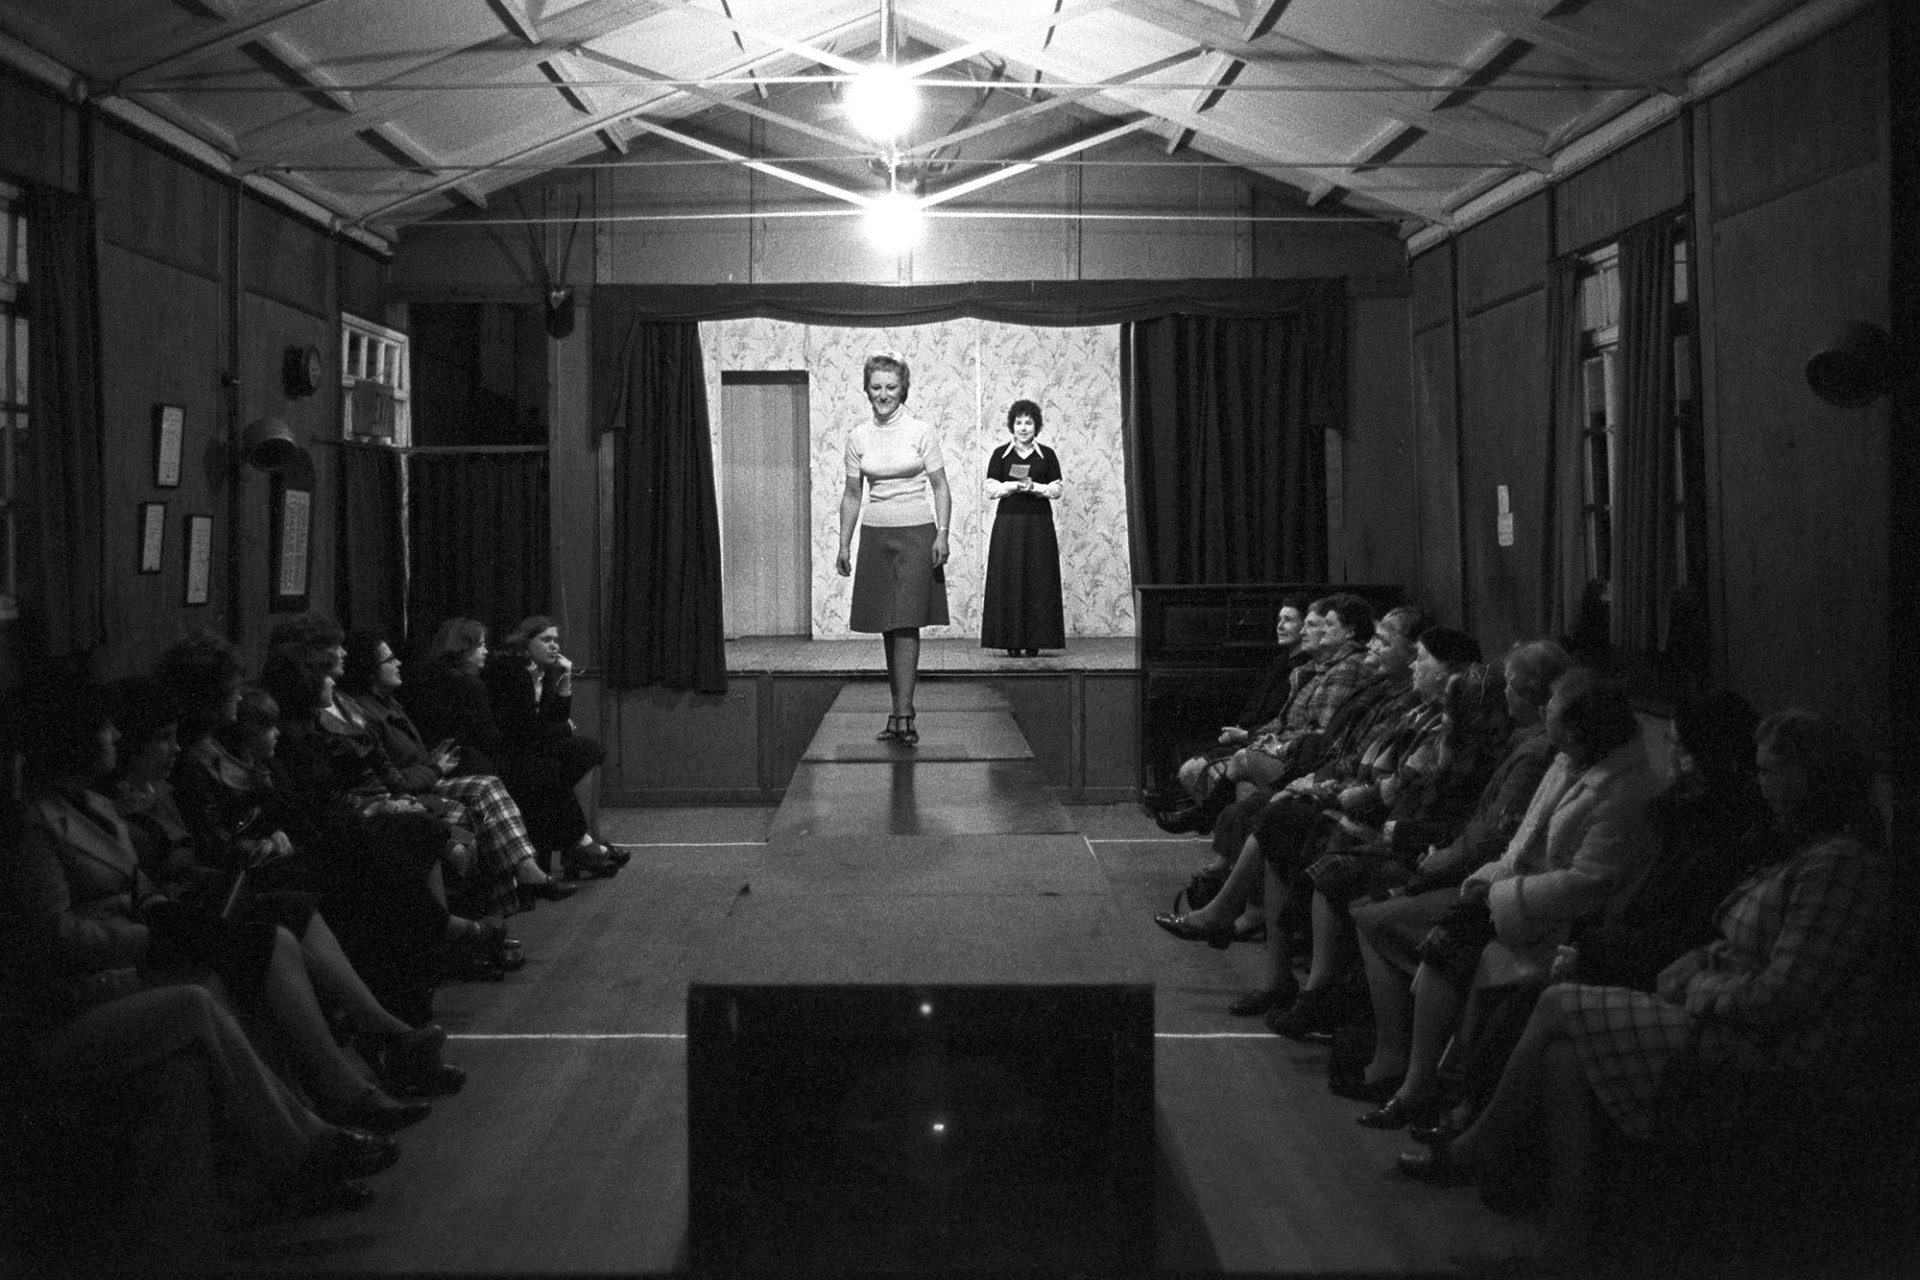 Fashion show in village hall (Victory Hall) modelled by women from the village.
[Women watching a fashion show in Beaford Village Hall.  One woman is standing on the stage while another is on the catwalk.]